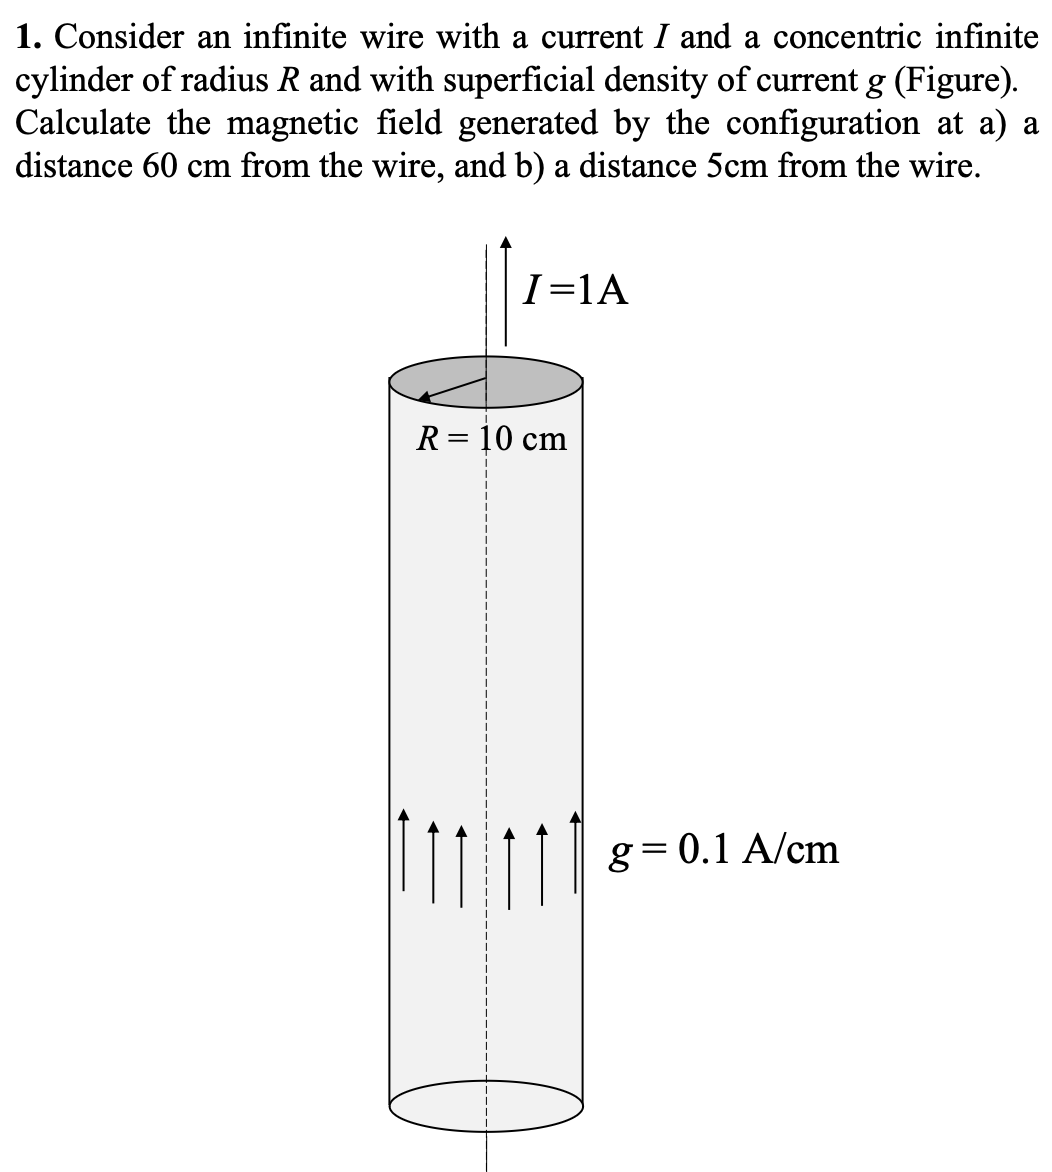 1. Consider an infinite wire with a current I and a concentric infinite
cylinder of radius R and with superficial density of current g (Figure).
Calculate the magnetic field generated by the configuration at a) a
distance 60 cm from the wire, and b) a distance 5cm from the wire.
I=1A
R = 10 cm
g=0.1 A/cm